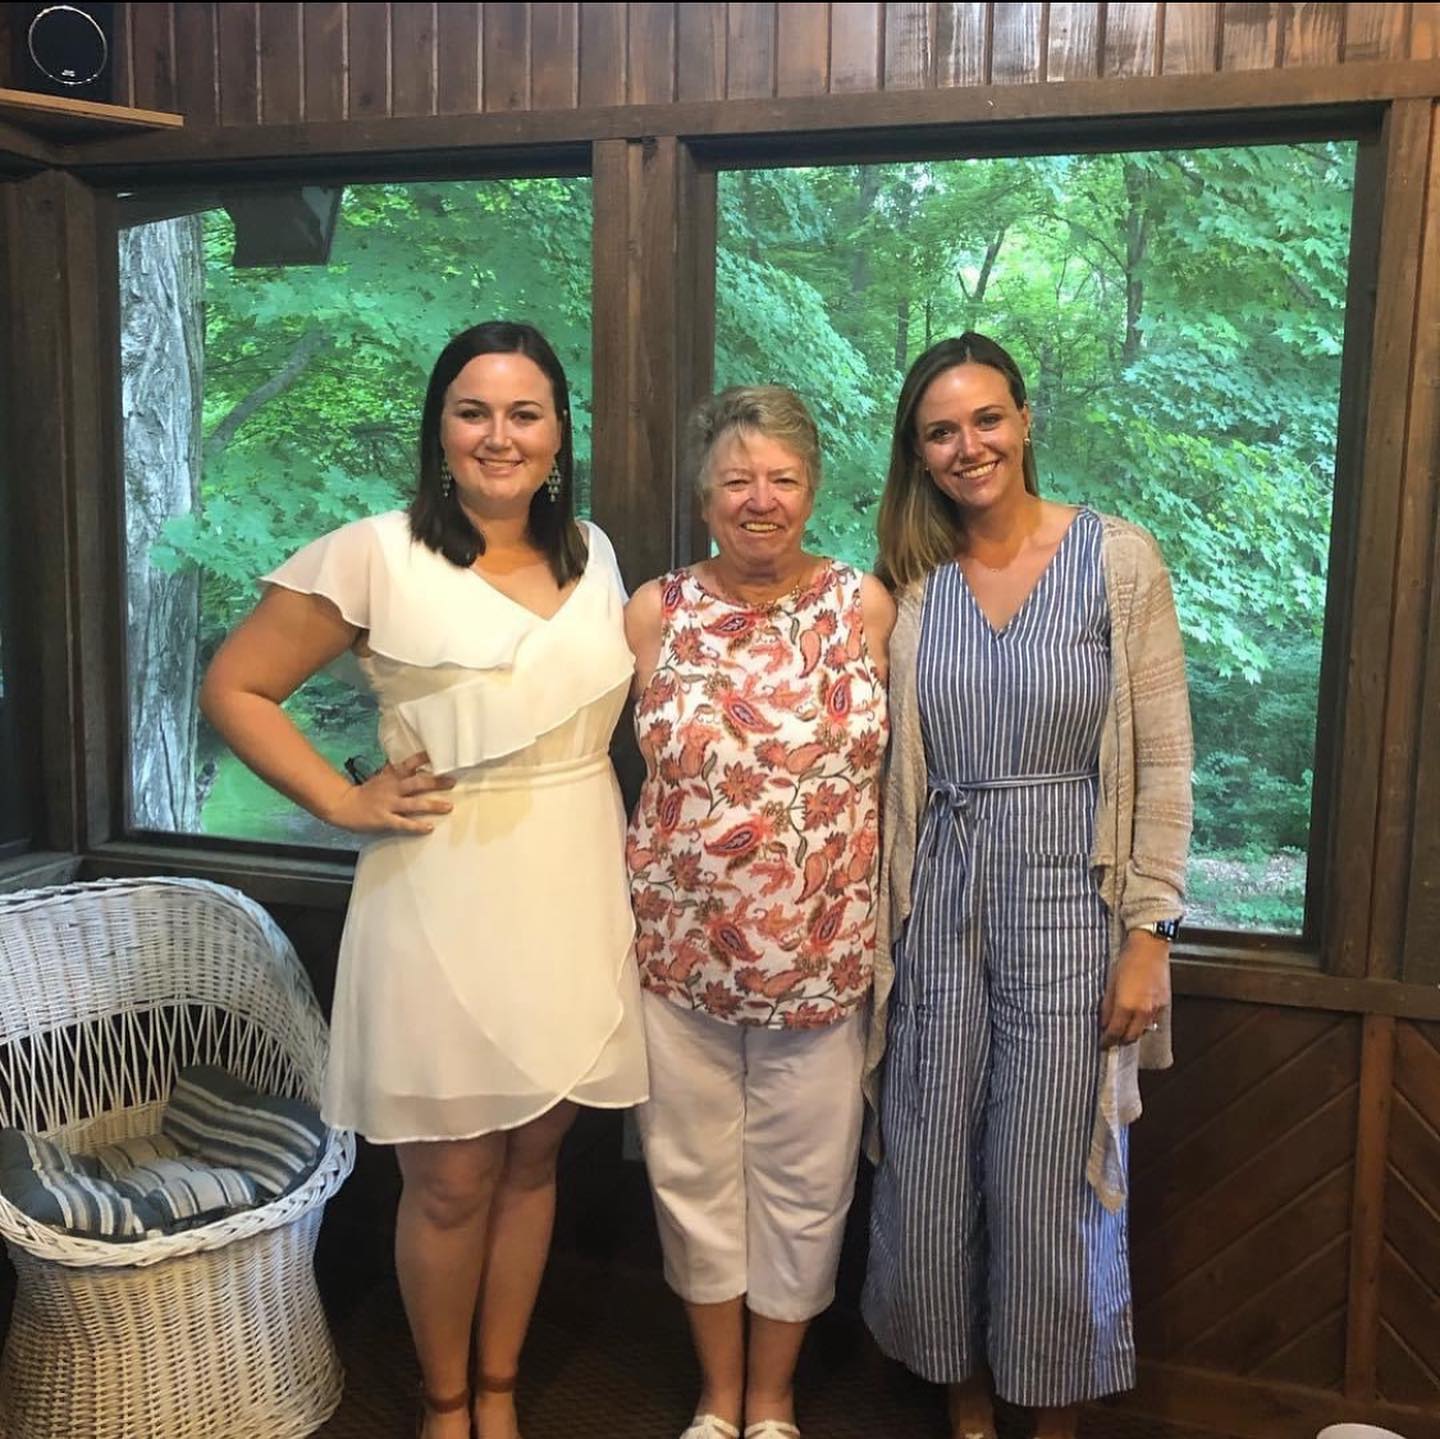 Grammy was so excited about her granddaughters getting married last summer!